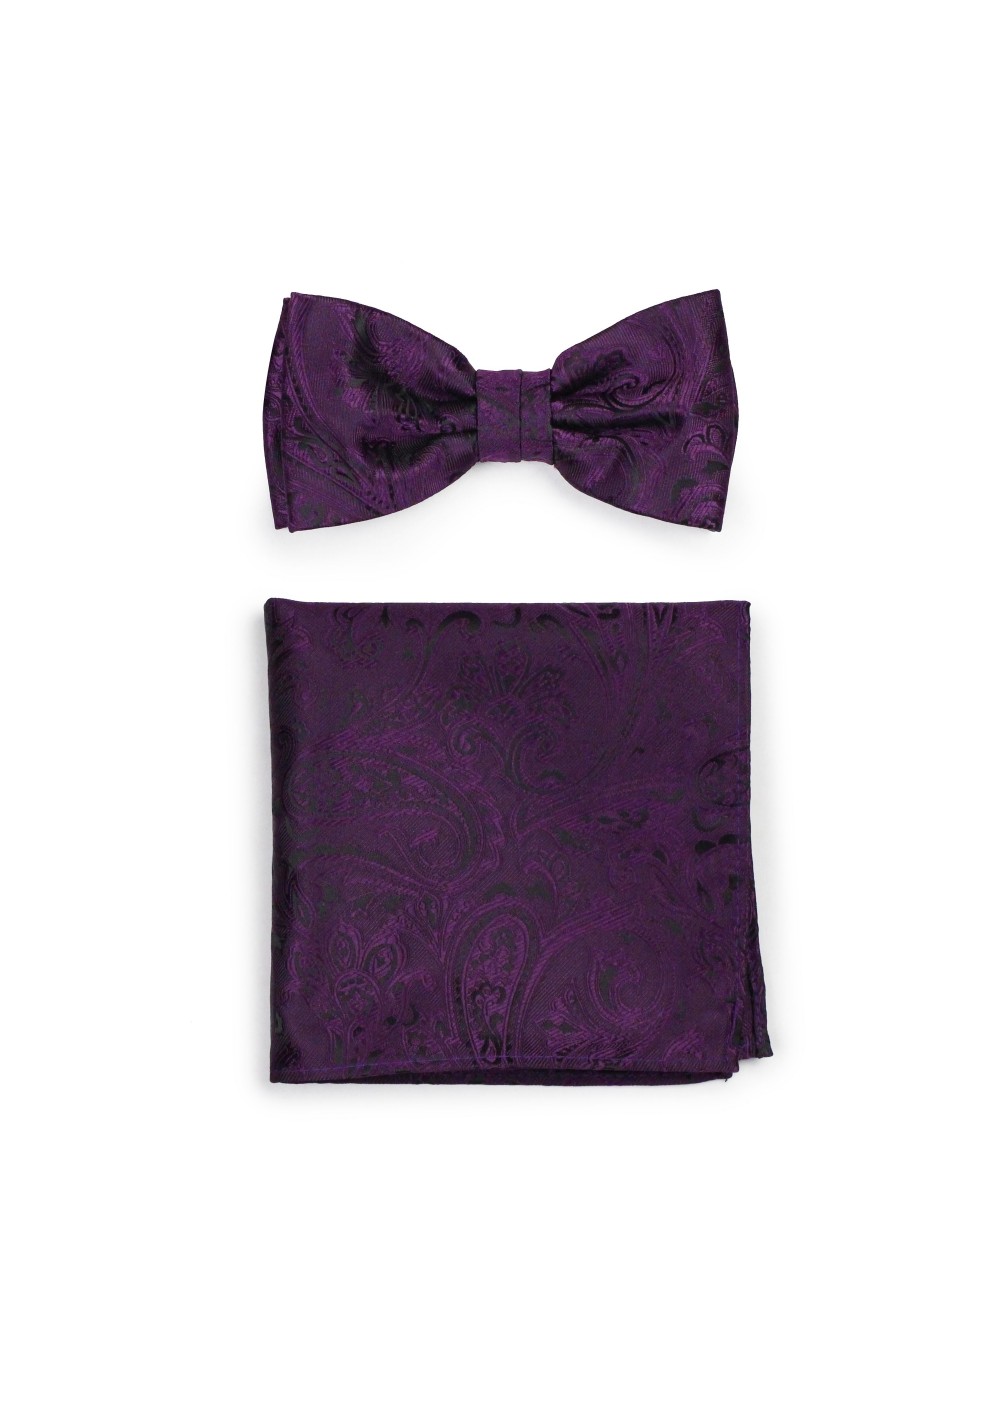 Mens Paisley Bow Tie and Hanky in Berry